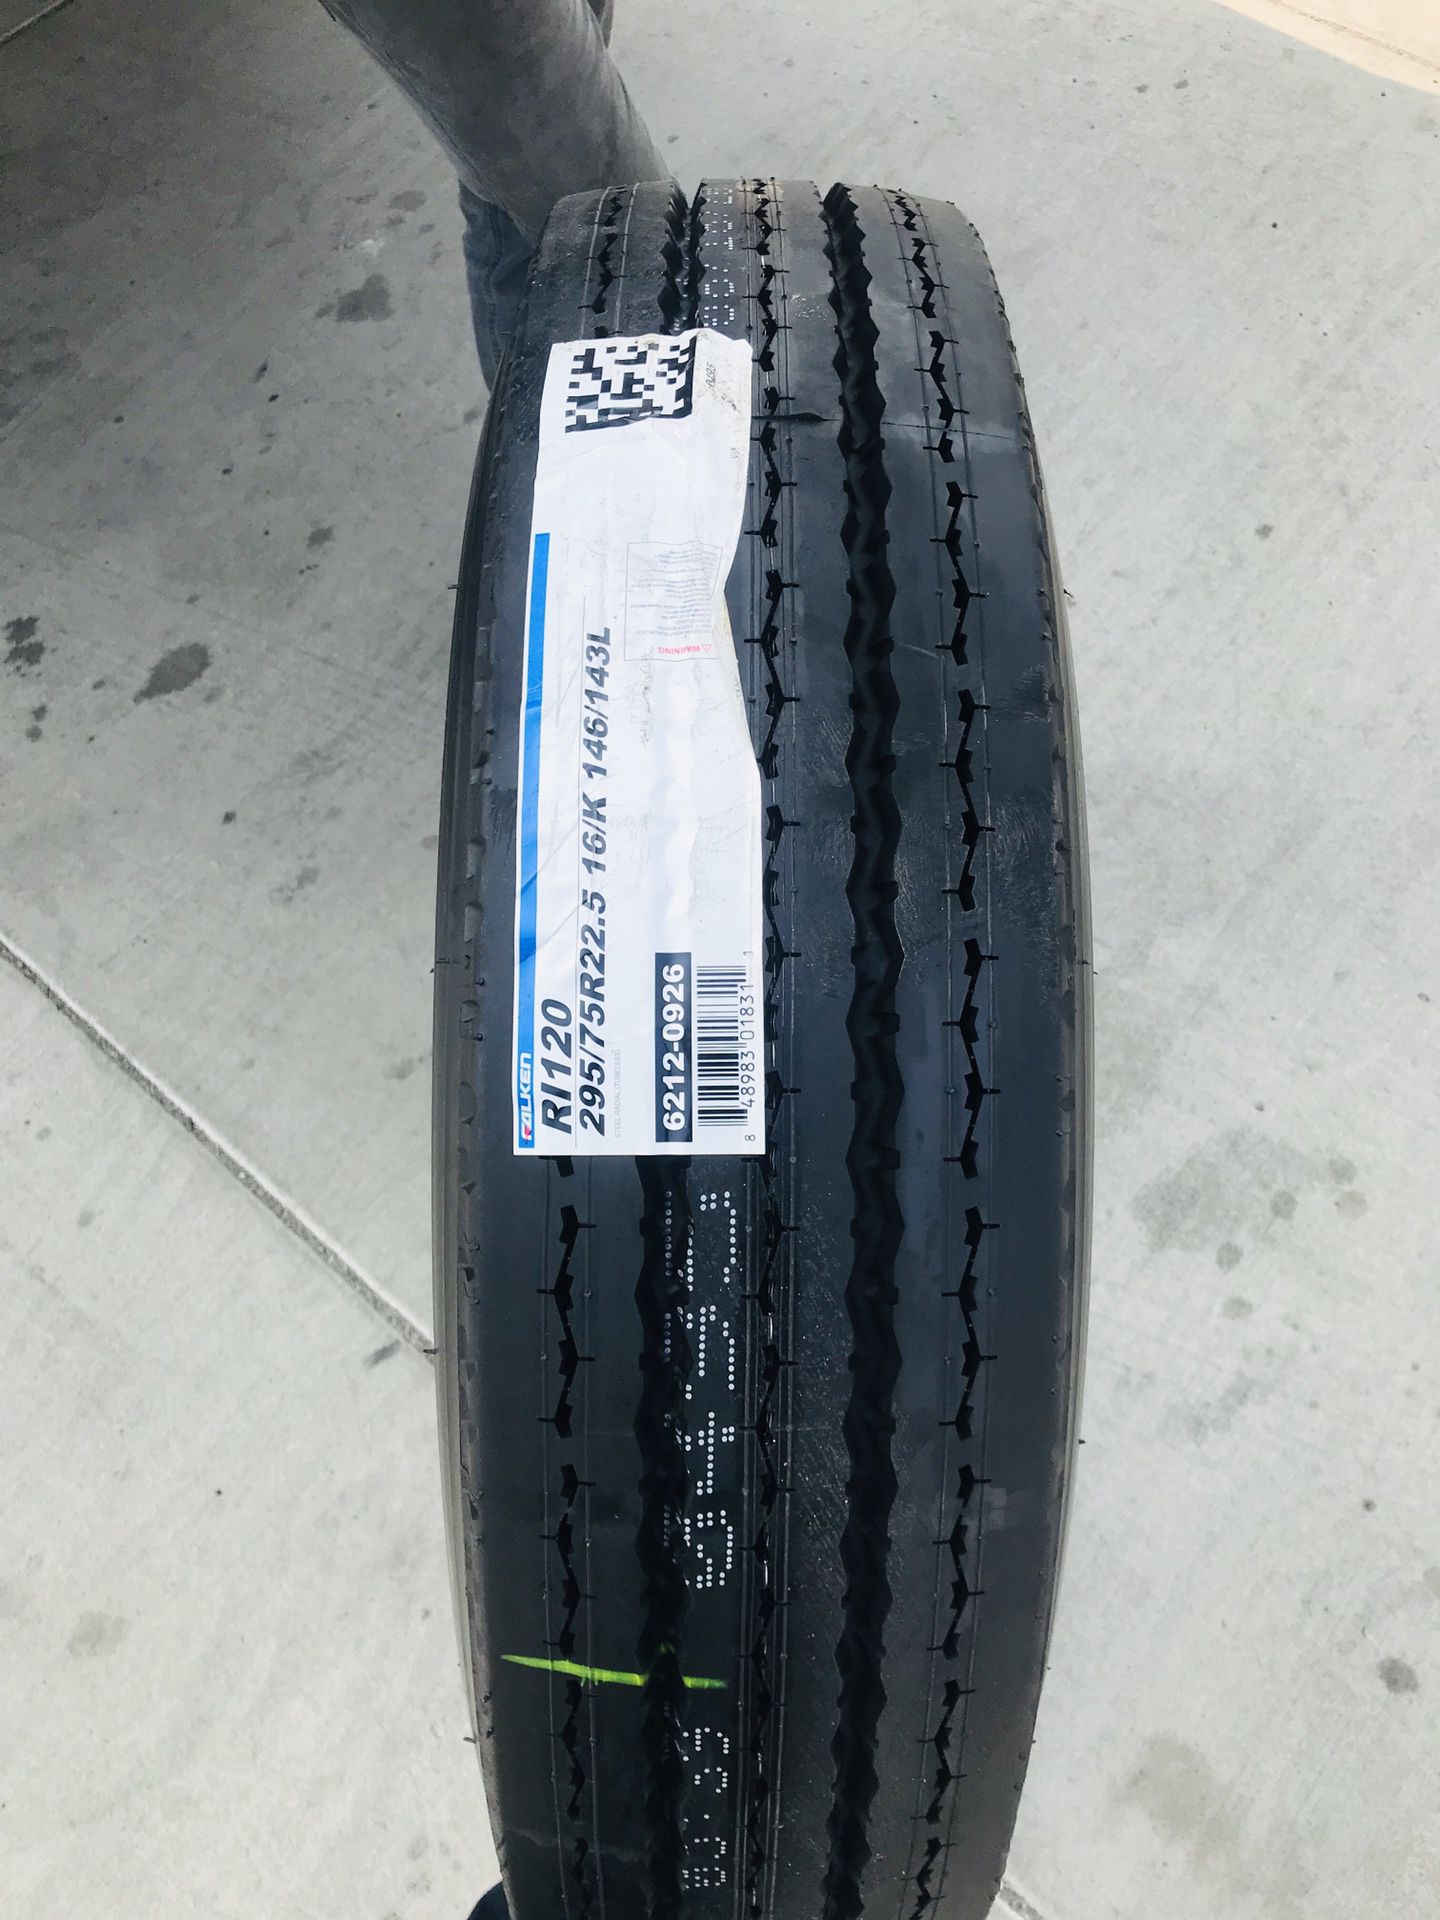 FALKEN RI120 295/75R22.5 16 PLY commercial truck and trailer tires